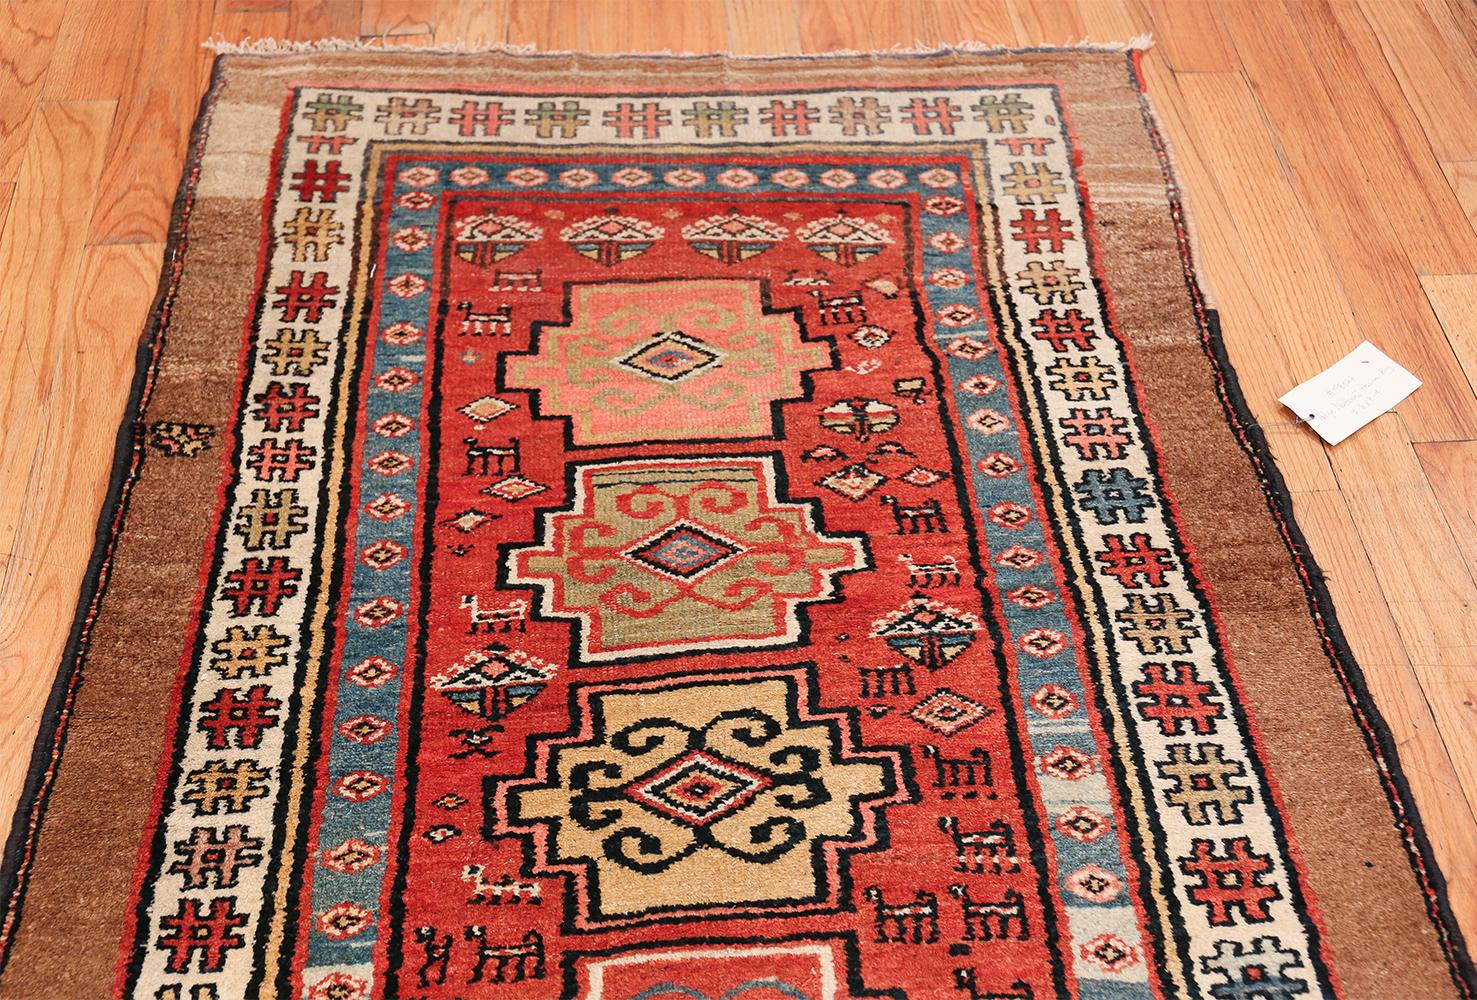 Wool Antique Persian Northwest Rug. Size: 3 ft 6 in x 8 ft 4 in (1.07 m x 2.54 m)